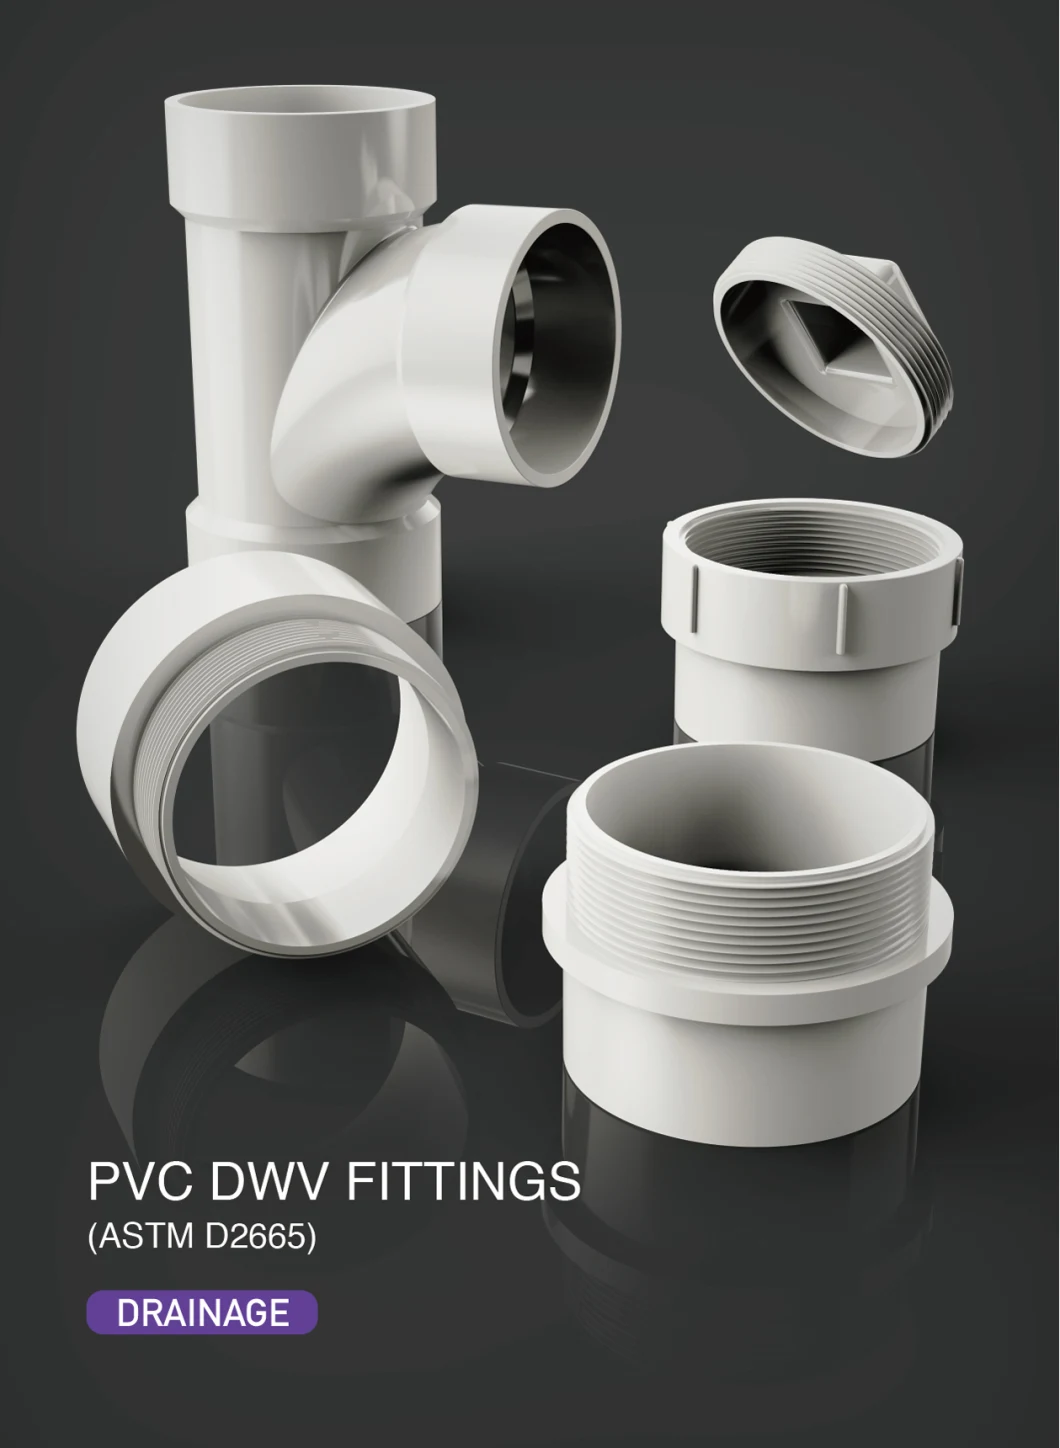 Era PVC Pipe Fitting 45degree 1-1/2'' ASTM D2665 for Drainage